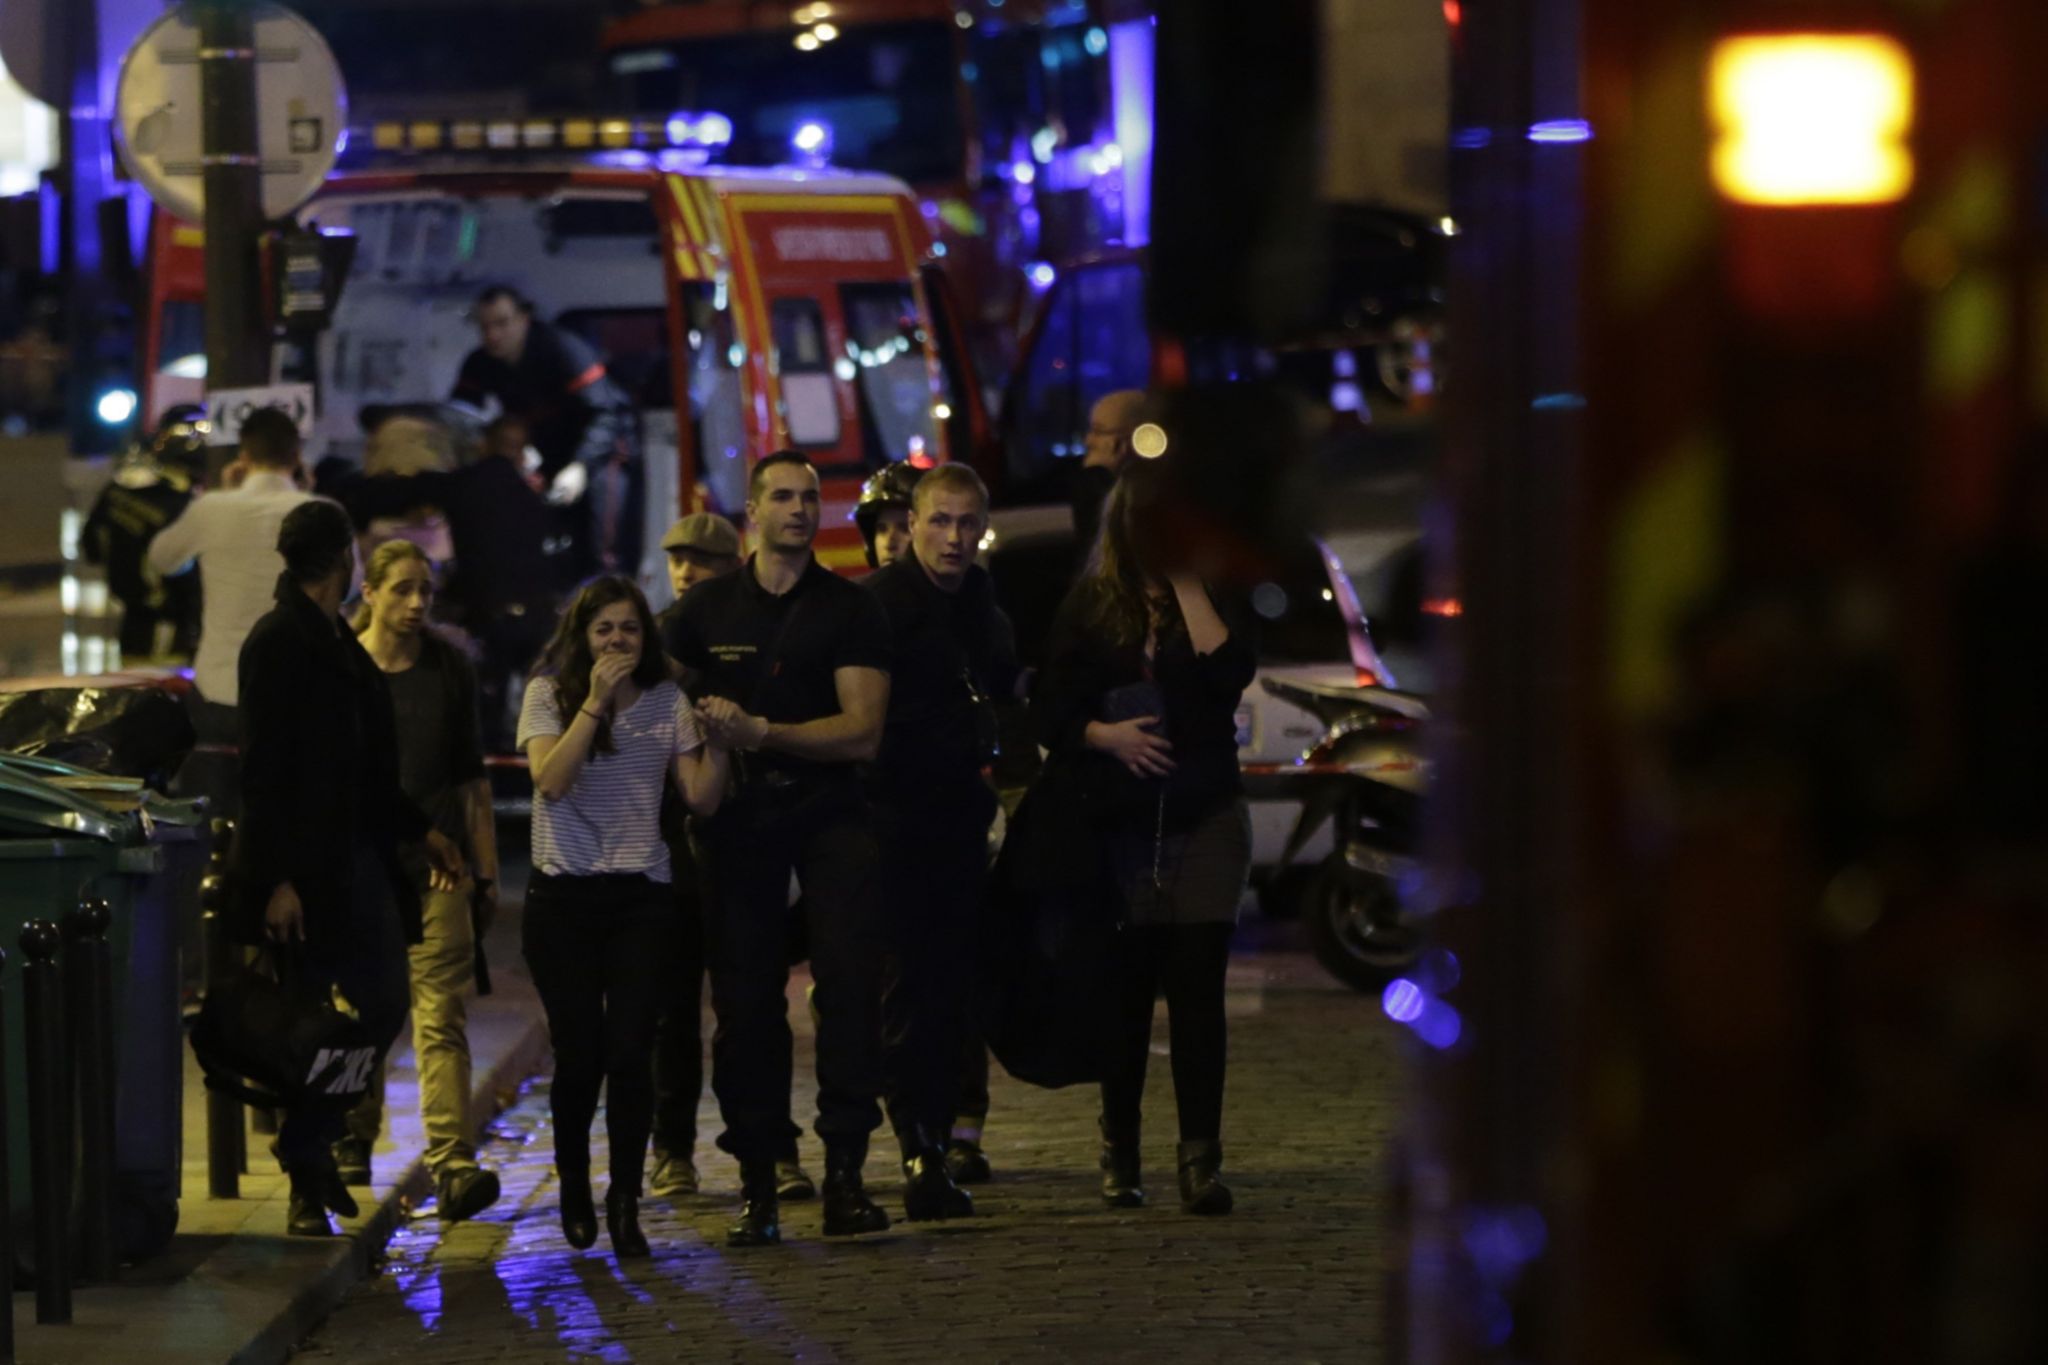 People being moved to safety from Bataclan concert hall